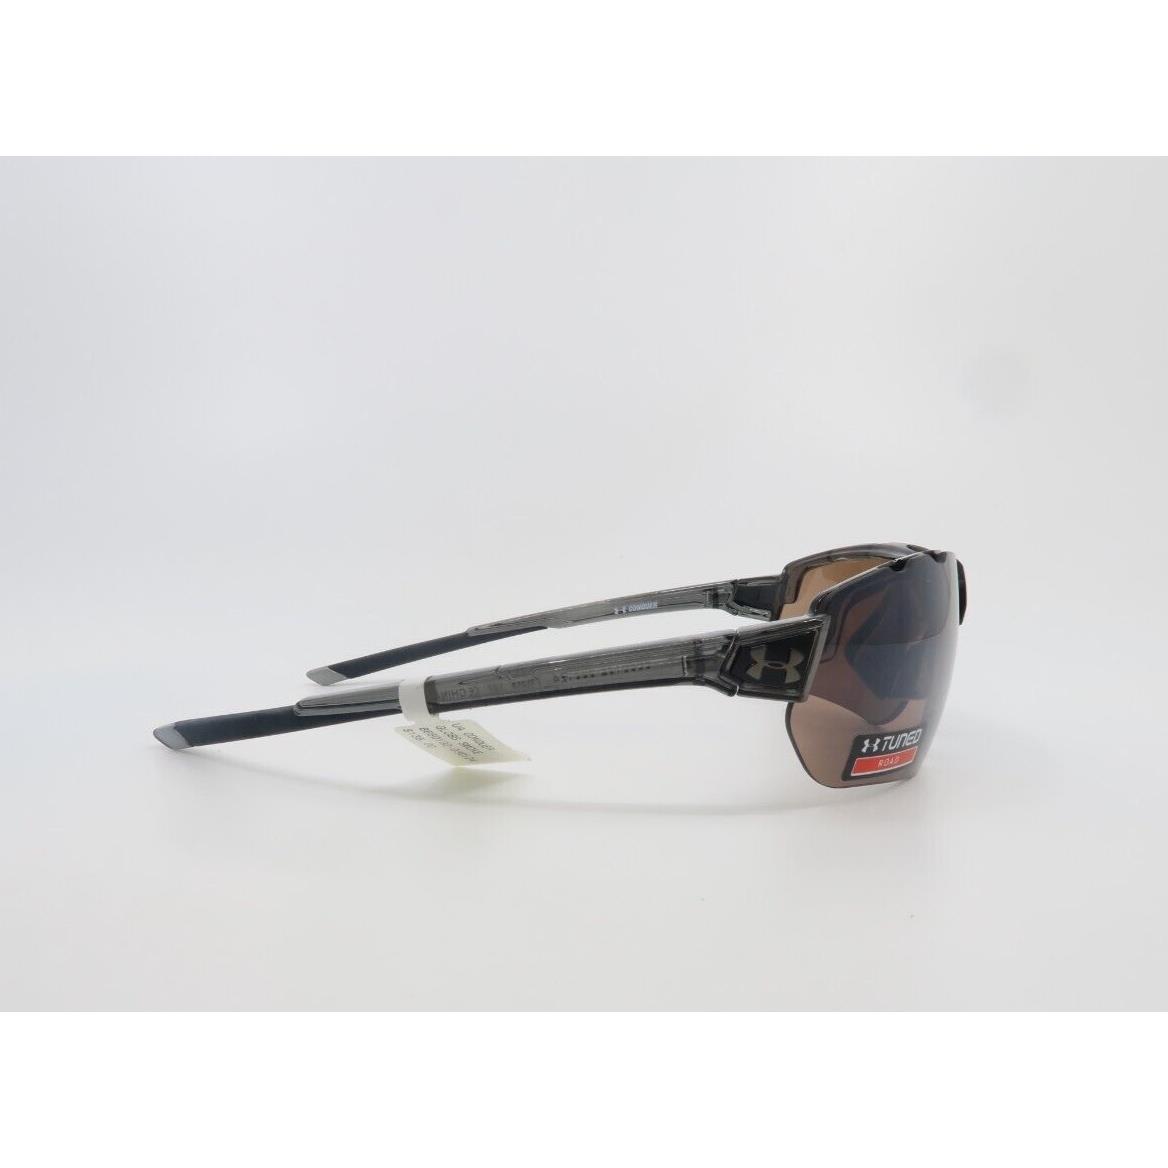 Under Armour sunglasses Tuned Road - Grey Frame, Smoke Brown Lens 5